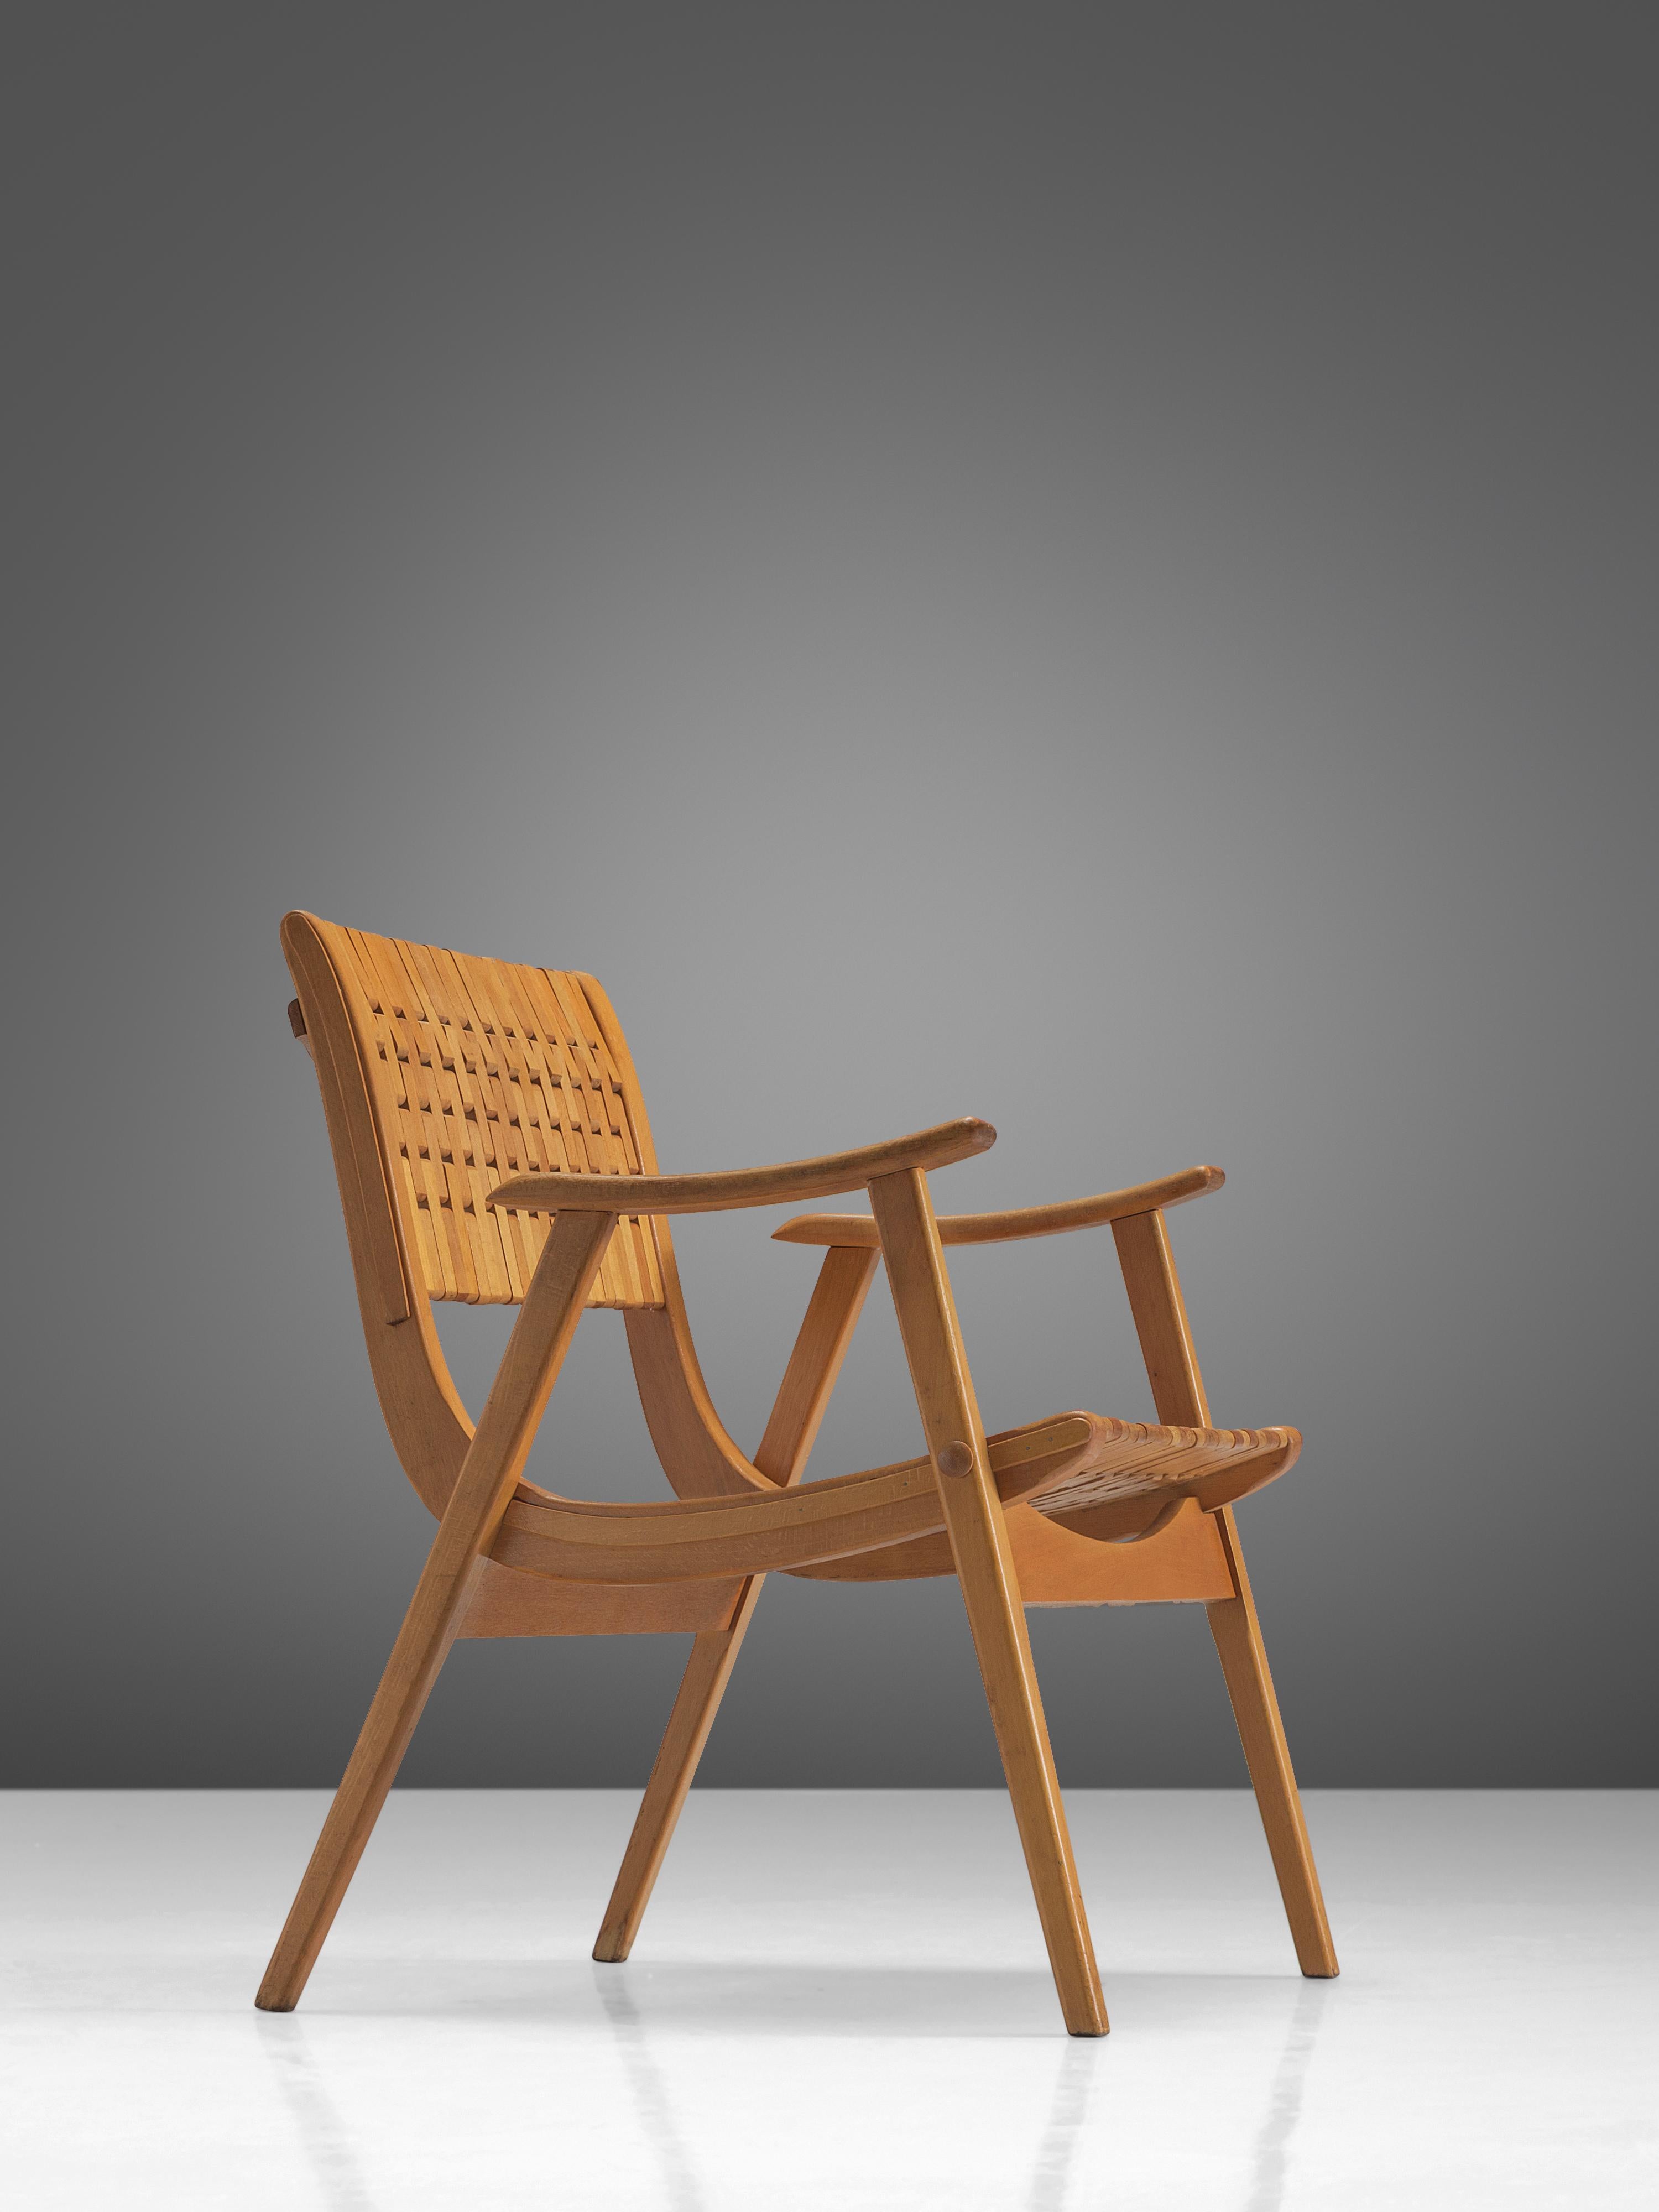 Erich Diekmann for Gelenka Tyskland, bent beech plywood, Germany, circa 1930.

This chair is designed by the German designer Erich Dieckmann who was affiliated to Bauhaus. The chair is executed with typical bent plywood and a webbed back. The style